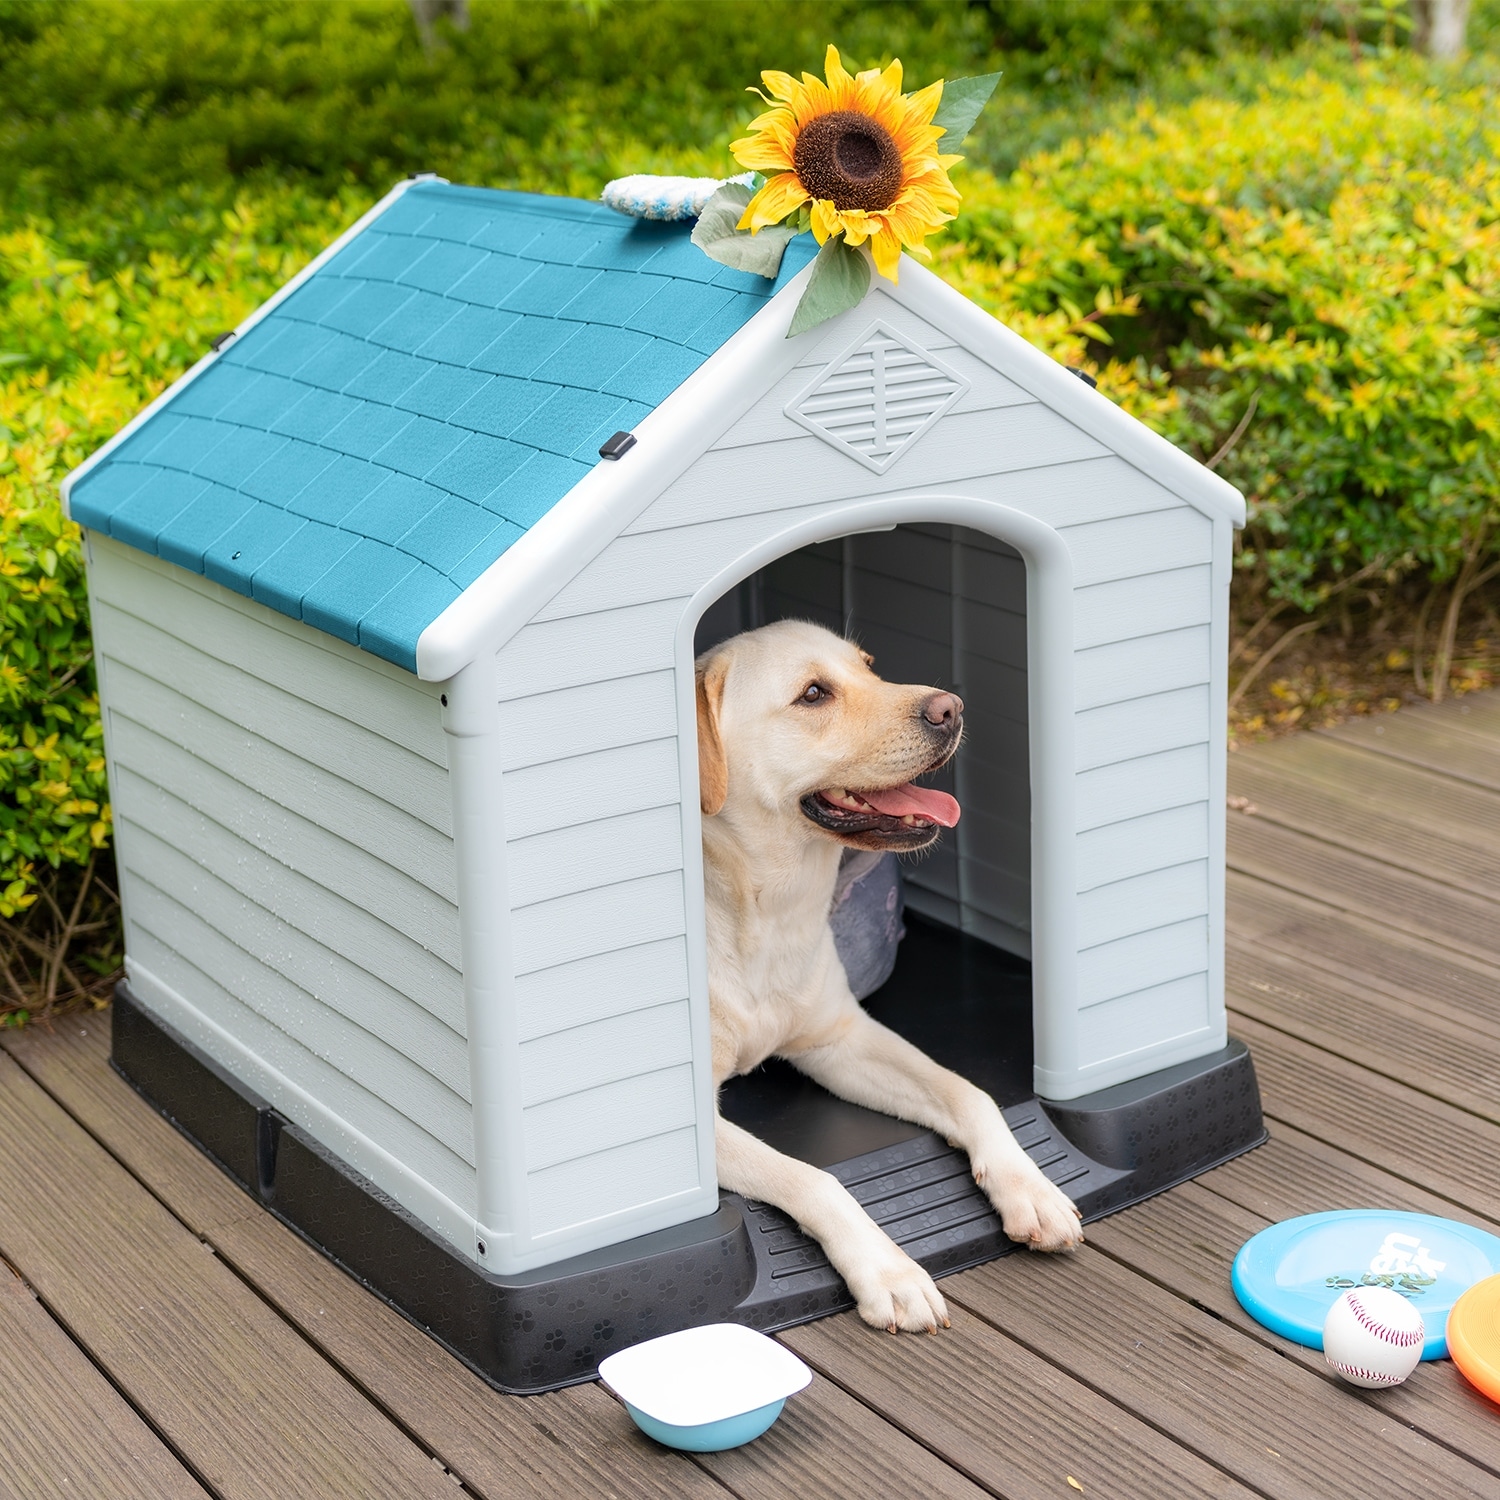 https://ak1.ostkcdn.com/images/products/is/images/direct/b1288f8c7d7a56049113e8070bf42b60529a4c25/Furniwell-Dog-Kennel-Plastic-Dog-House-Indoor-Outdoor-for-Large-Dogs.jpg